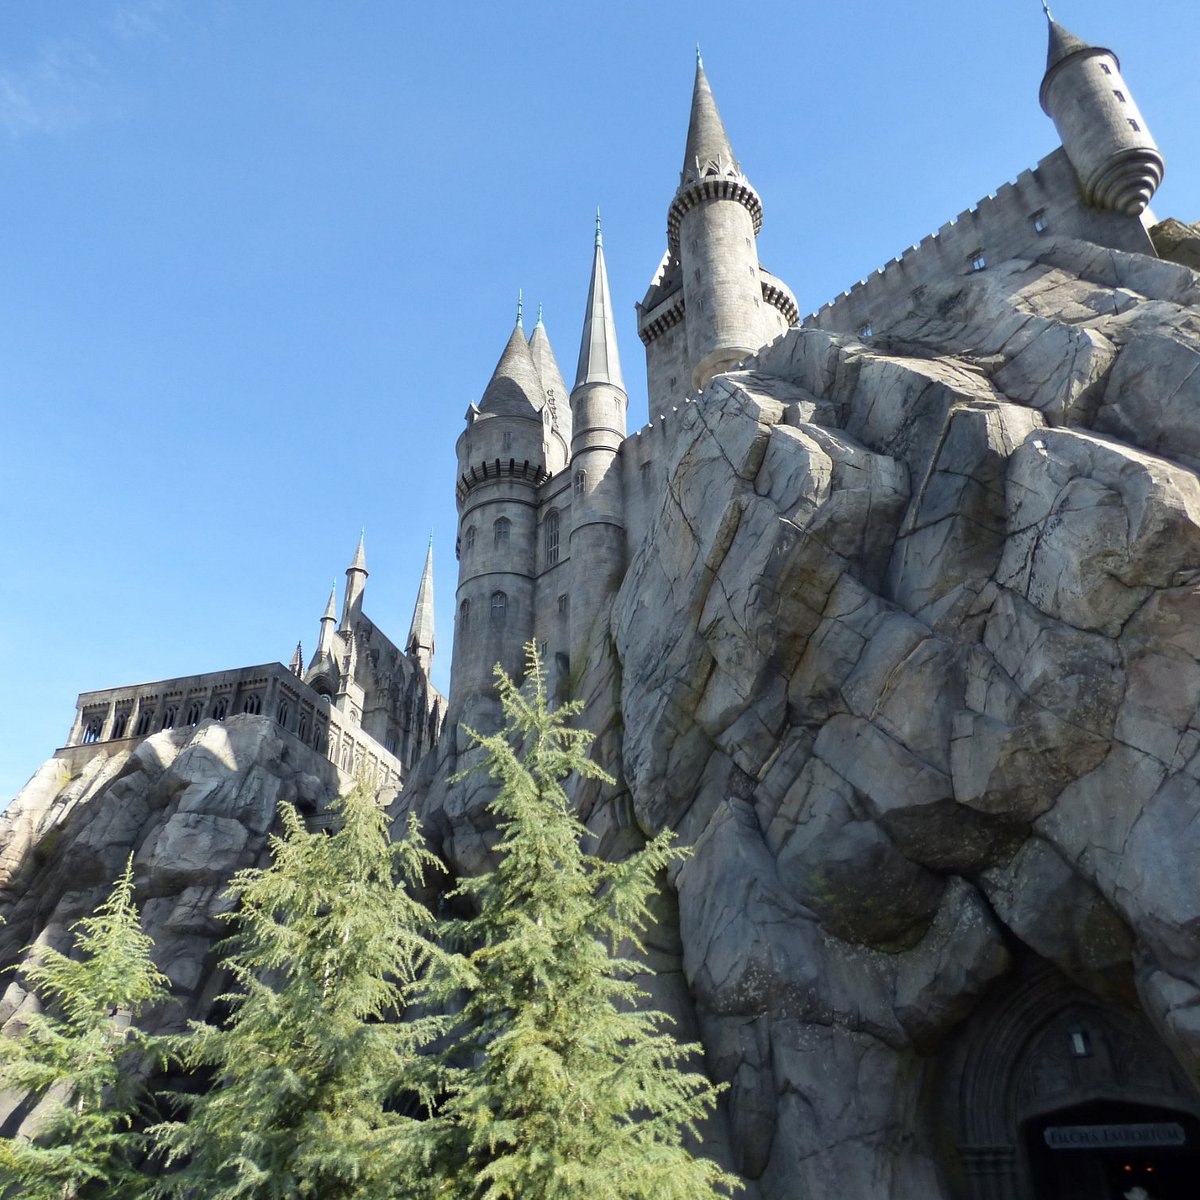 Forbidden Journey, One of my favorite rides is Harry Potter…